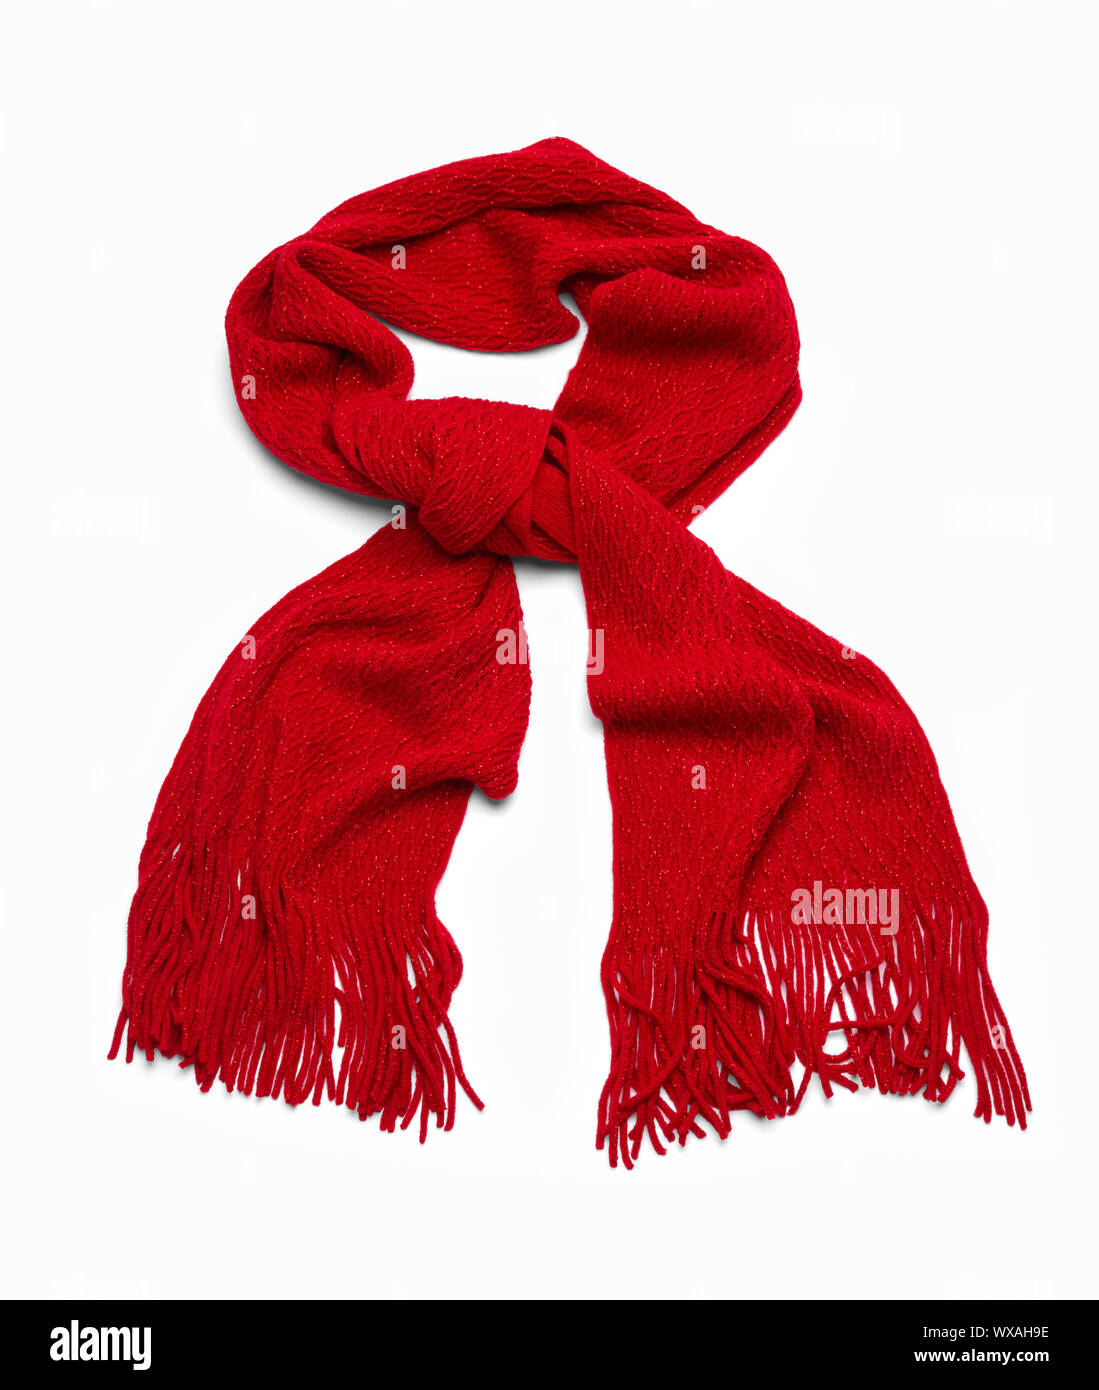 Red Wool Scarf Isolated on White Background. Stock Photo